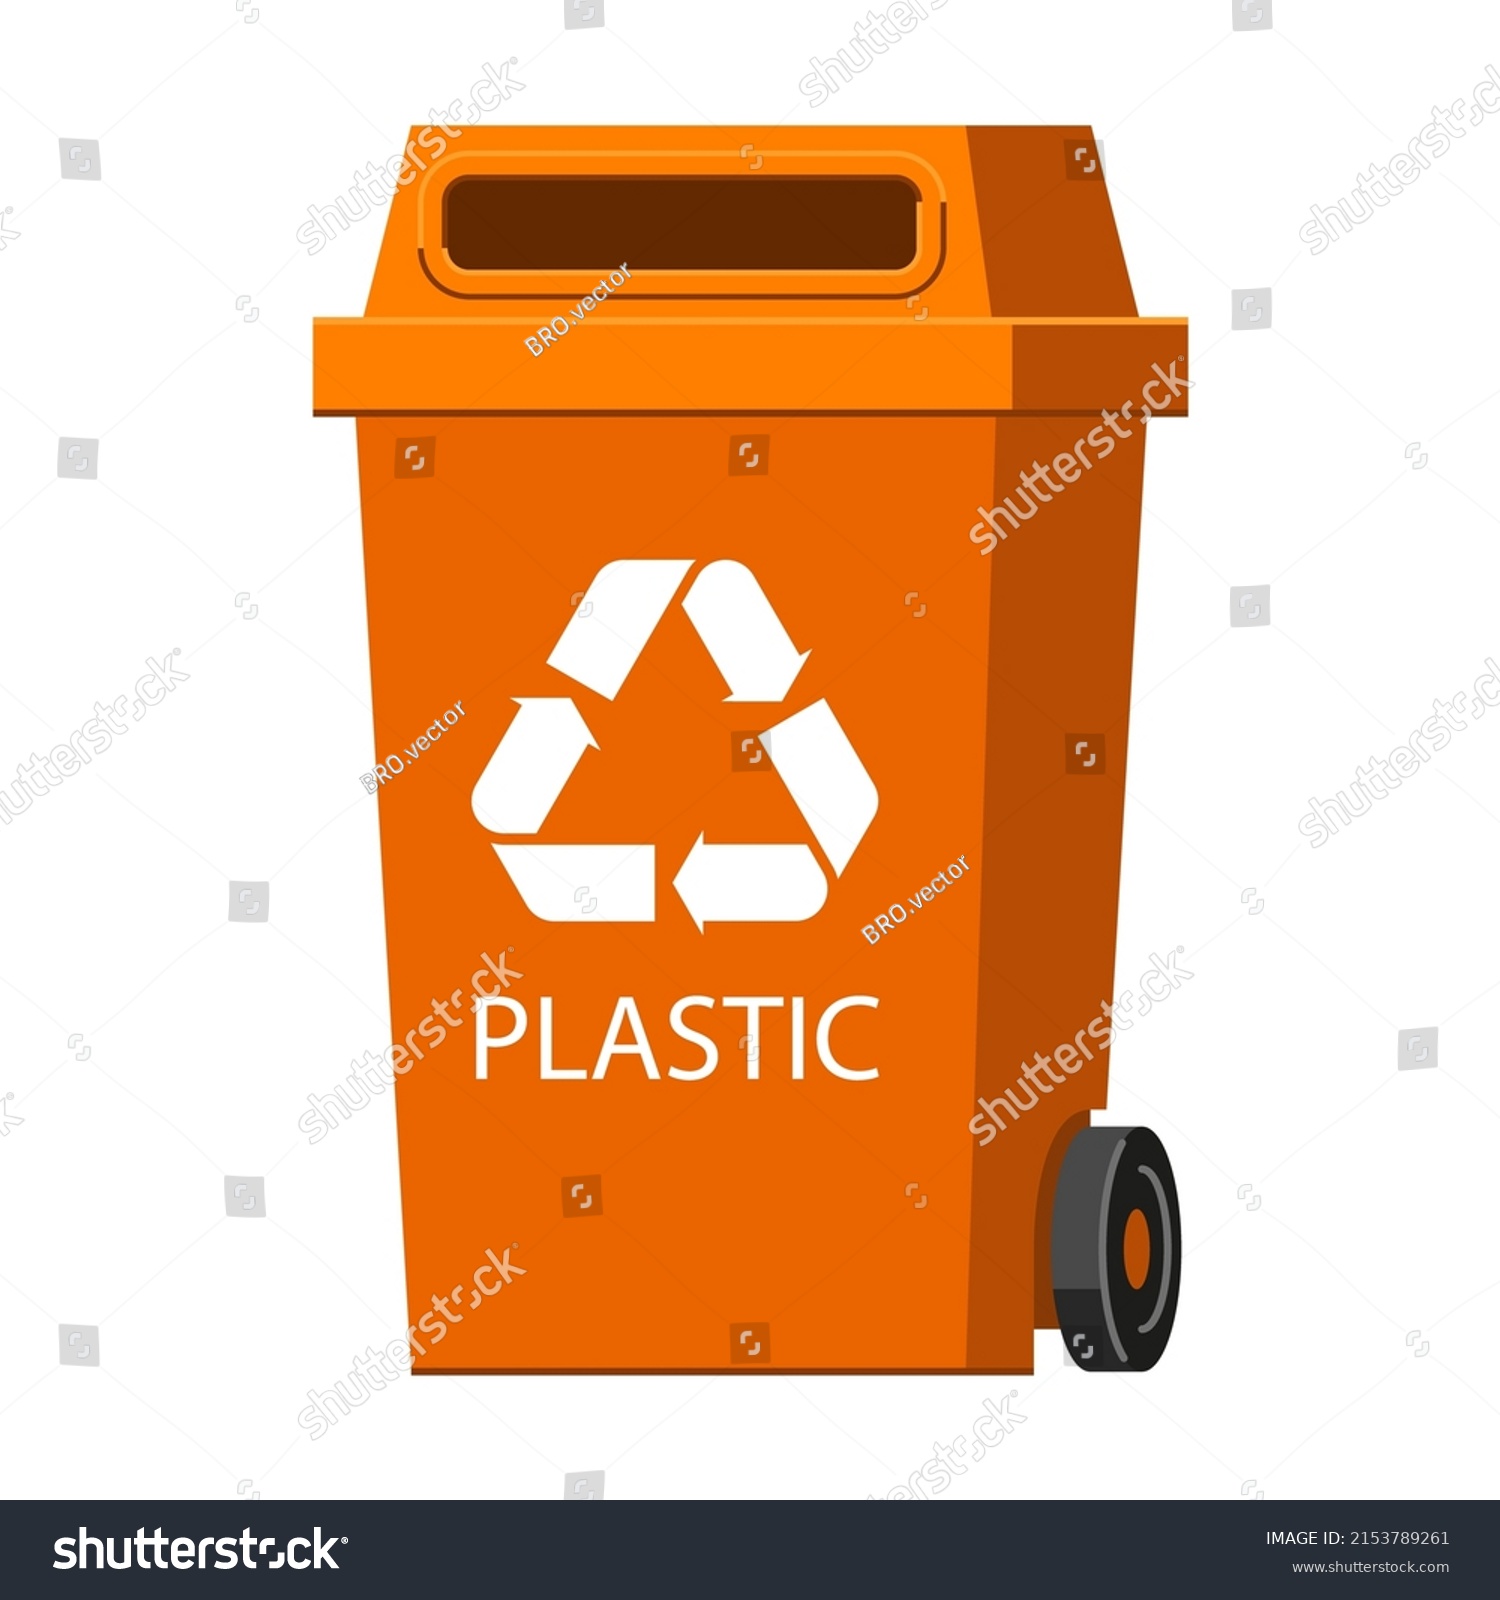 Orange Container Plastic Waste Garbage Recycle Stock Vector (Royalty ...